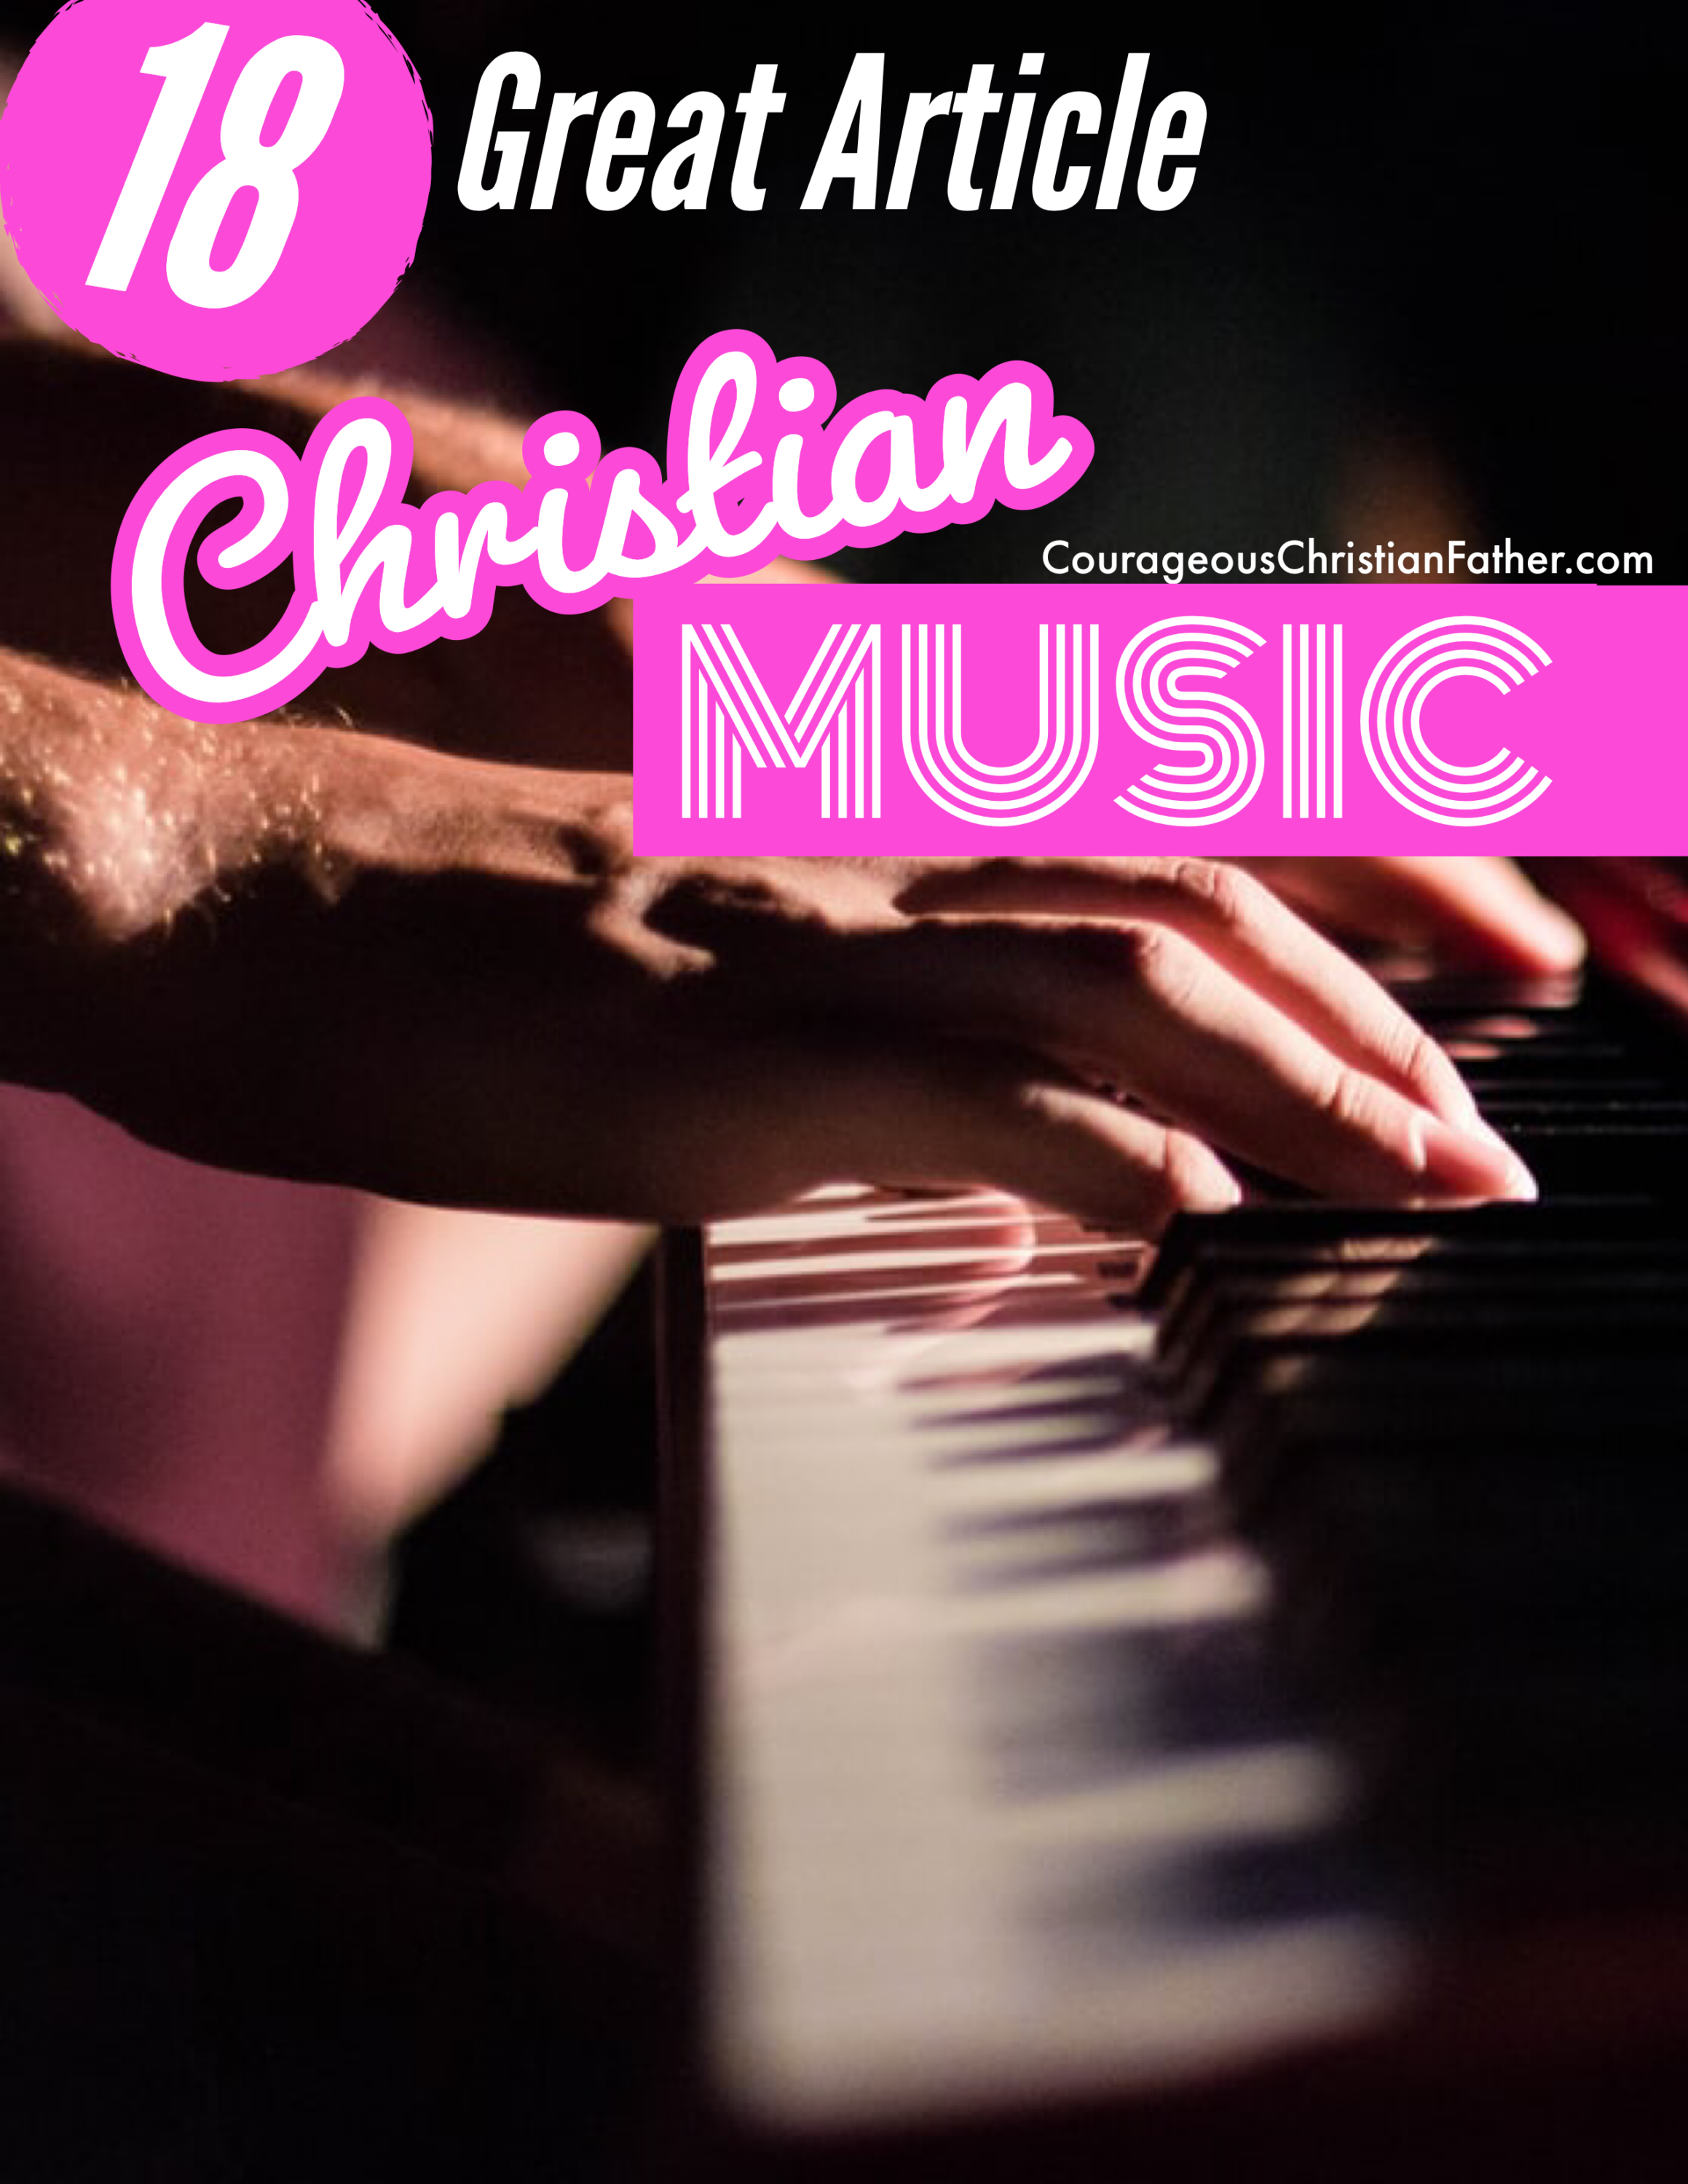 18 Great Articles About Christian Music - Here are 18 great articles that you can read and learn more about Christian Music. #ChristianMusic